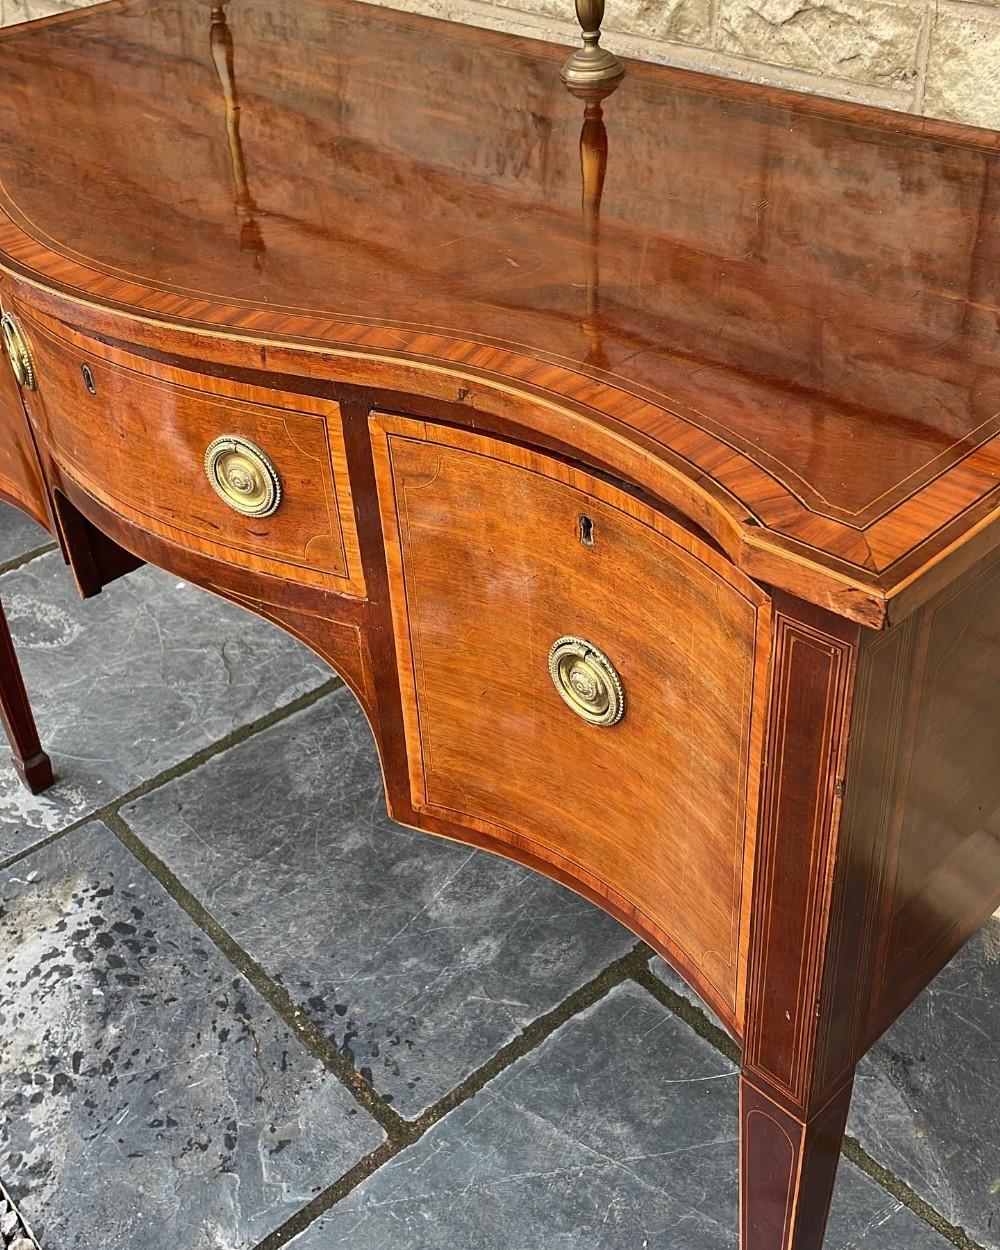  Early 19th C. English Inlaid Figured Mahogany Hepp. Style Serpentine Sideboard In Good Condition For Sale In Charleston, SC